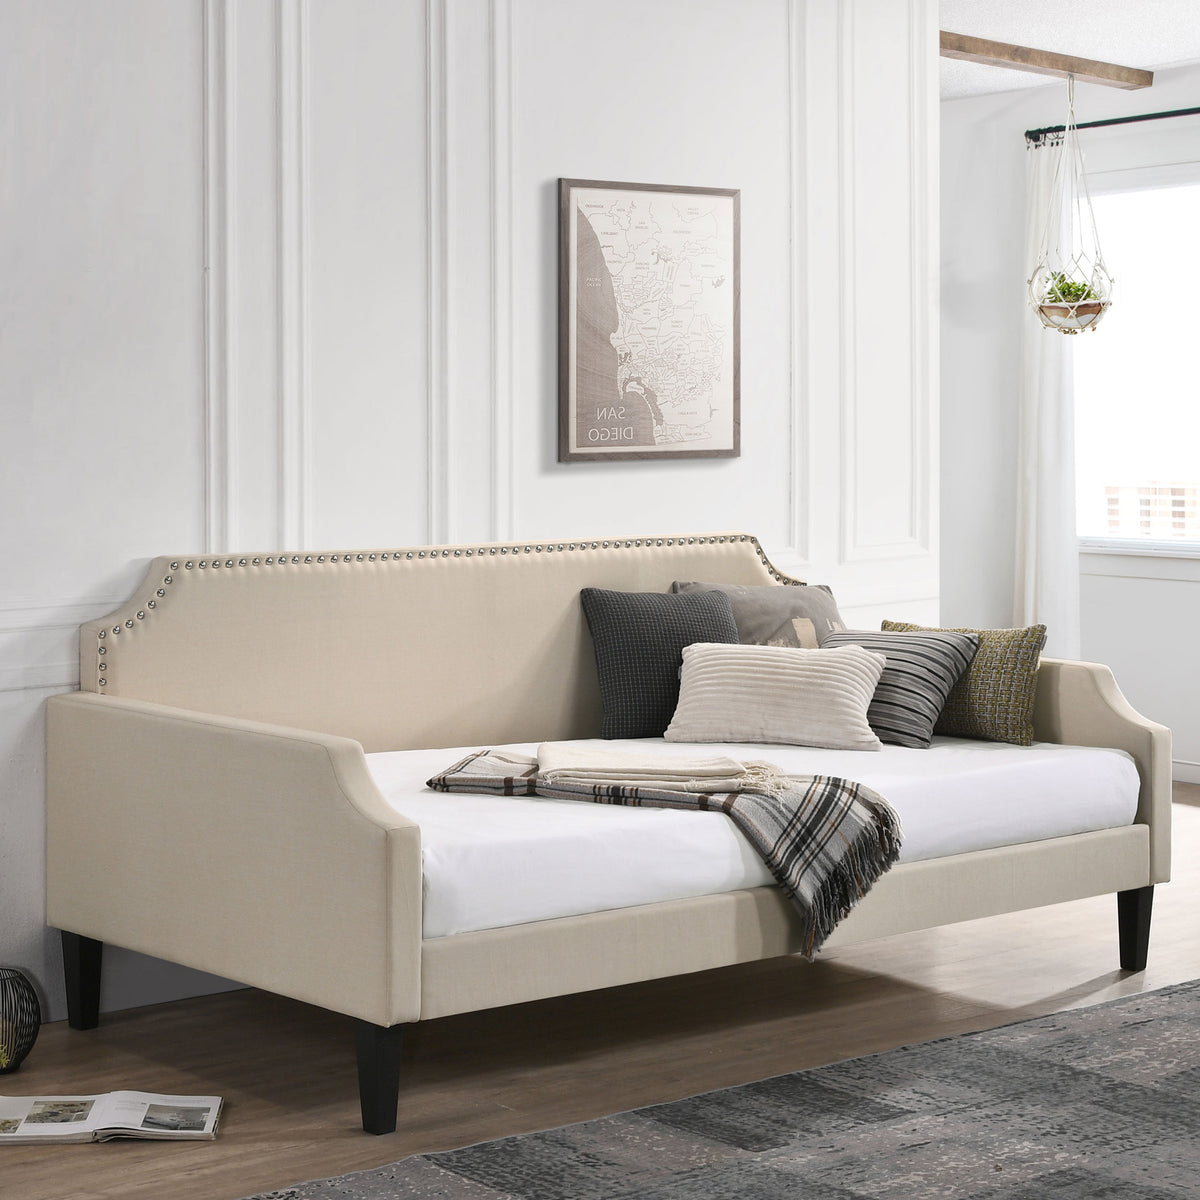 Olivia Upholstered Twin Daybed with Nailhead Trim  Las Vegas Furniture Stores